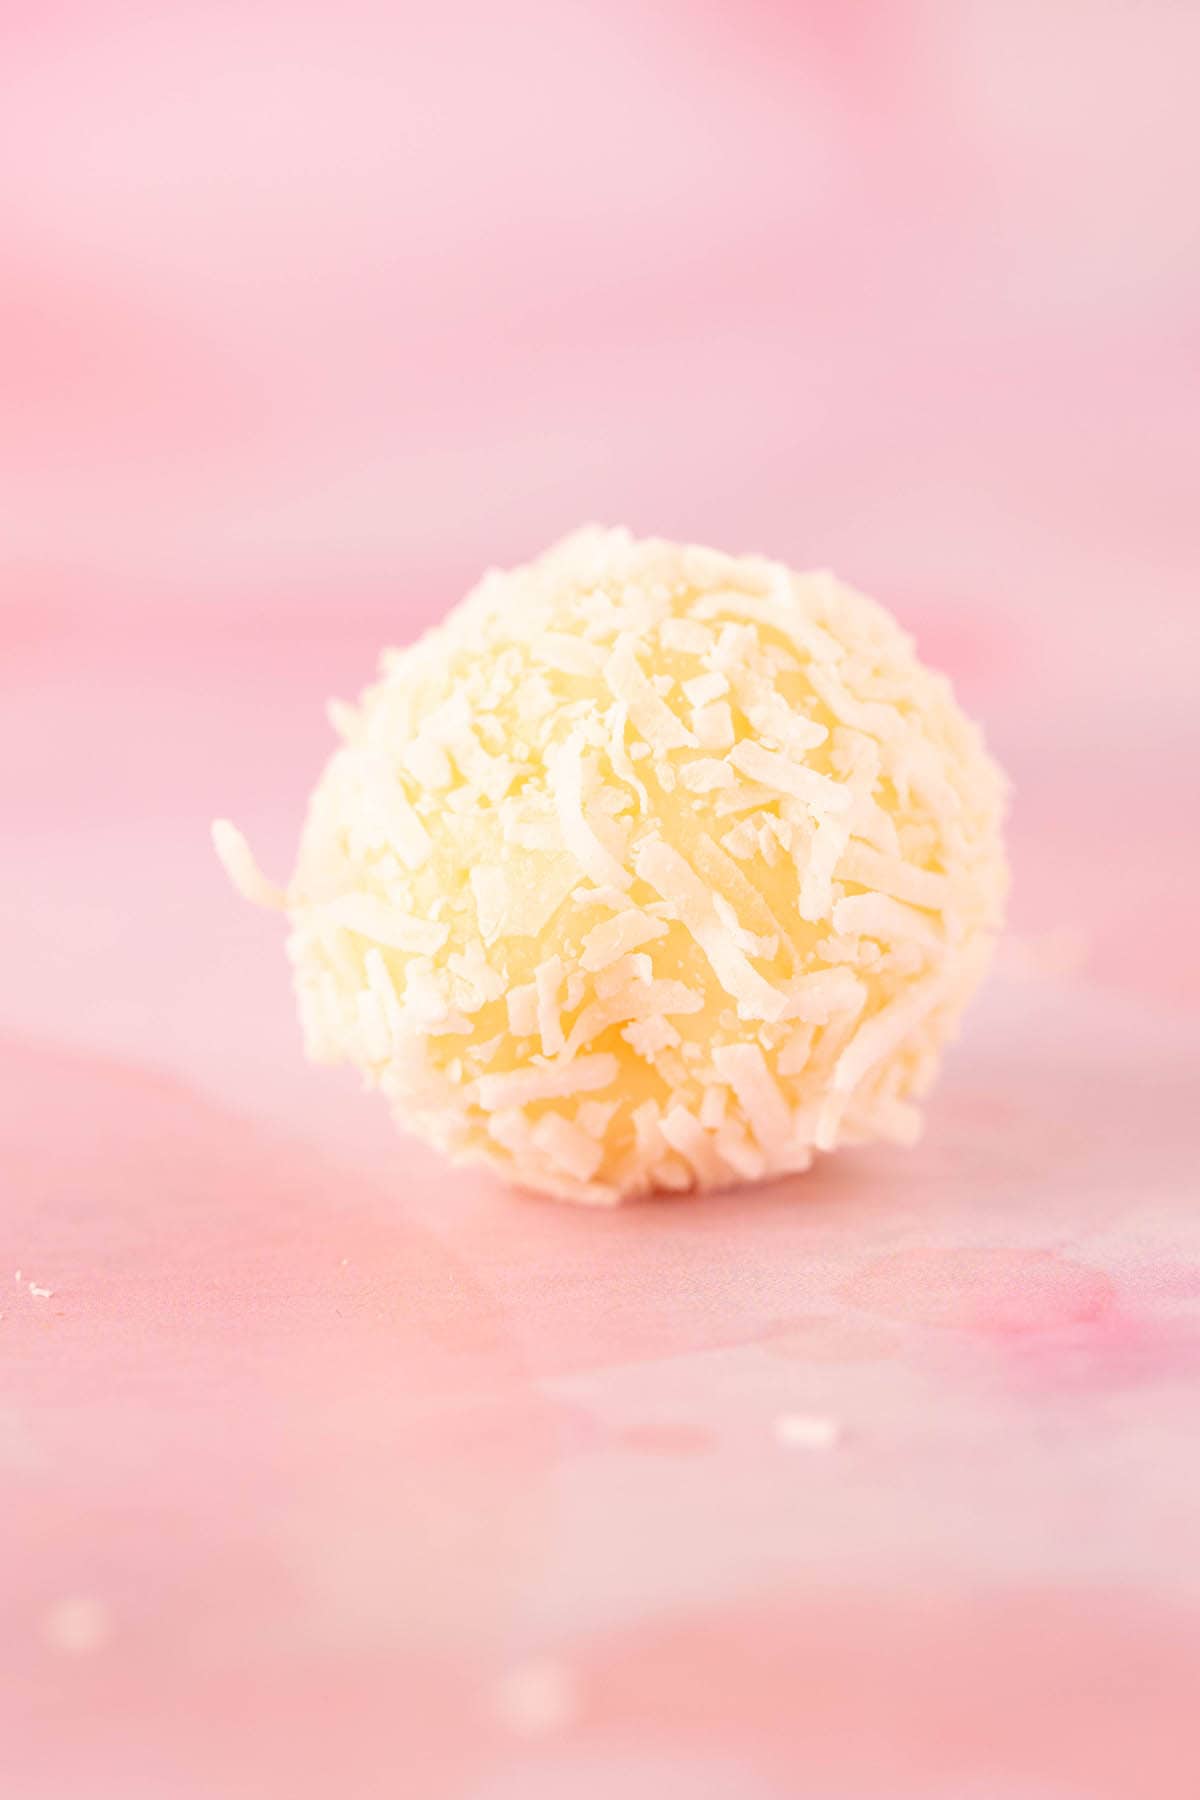 One Coconut Truffle on a pink background.